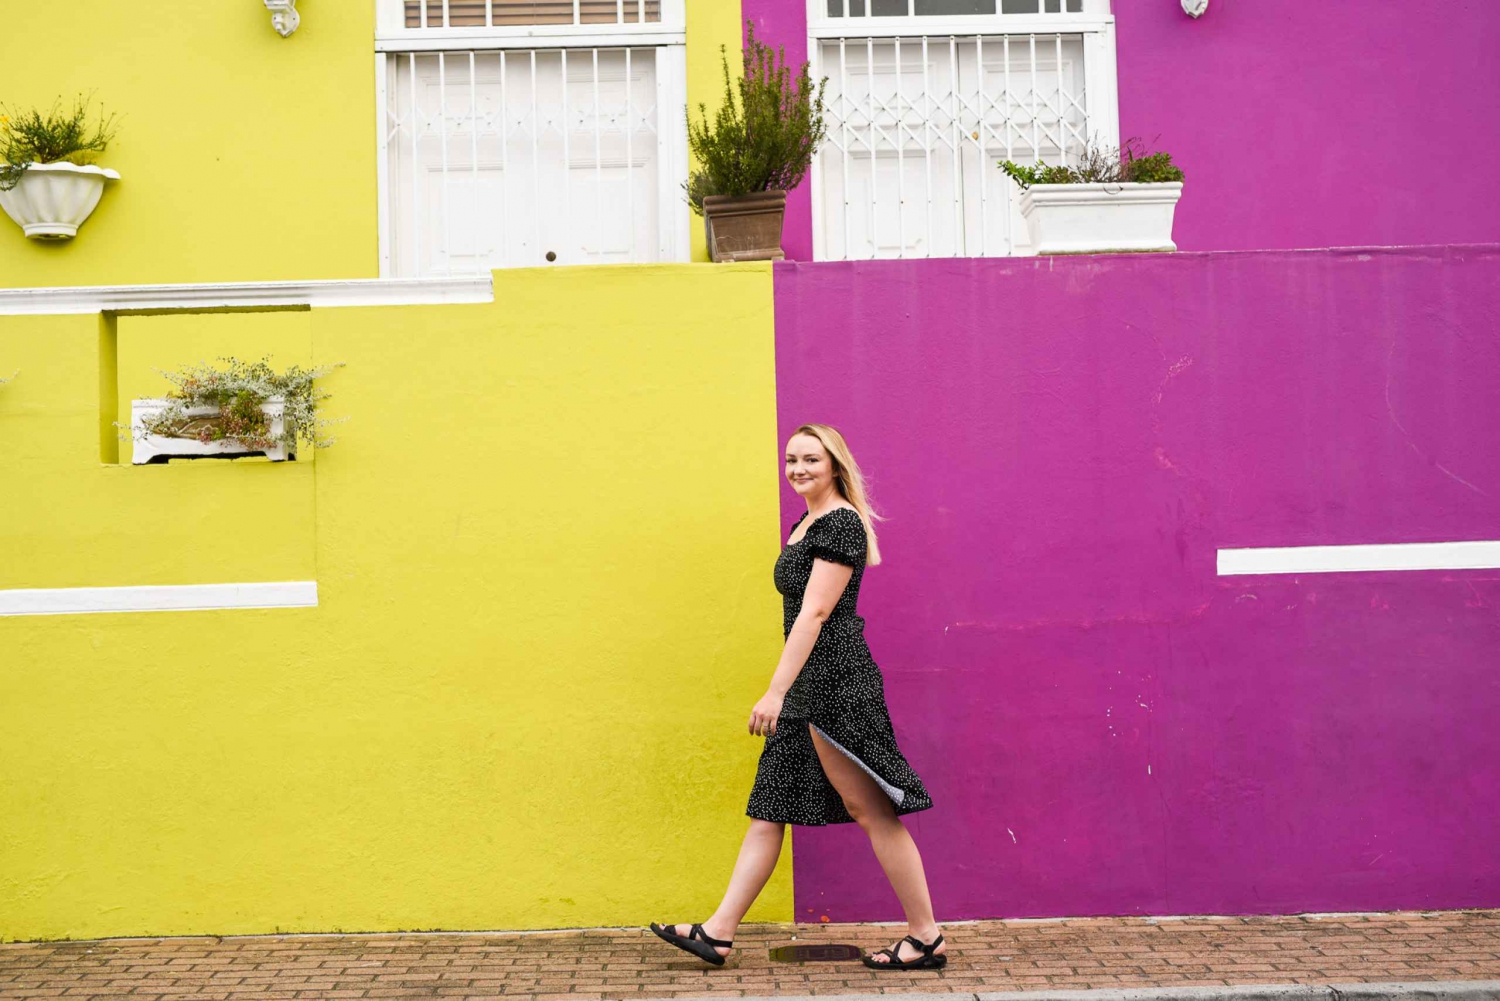 Cape Town: Your own photoshoot in Bo-Kaap